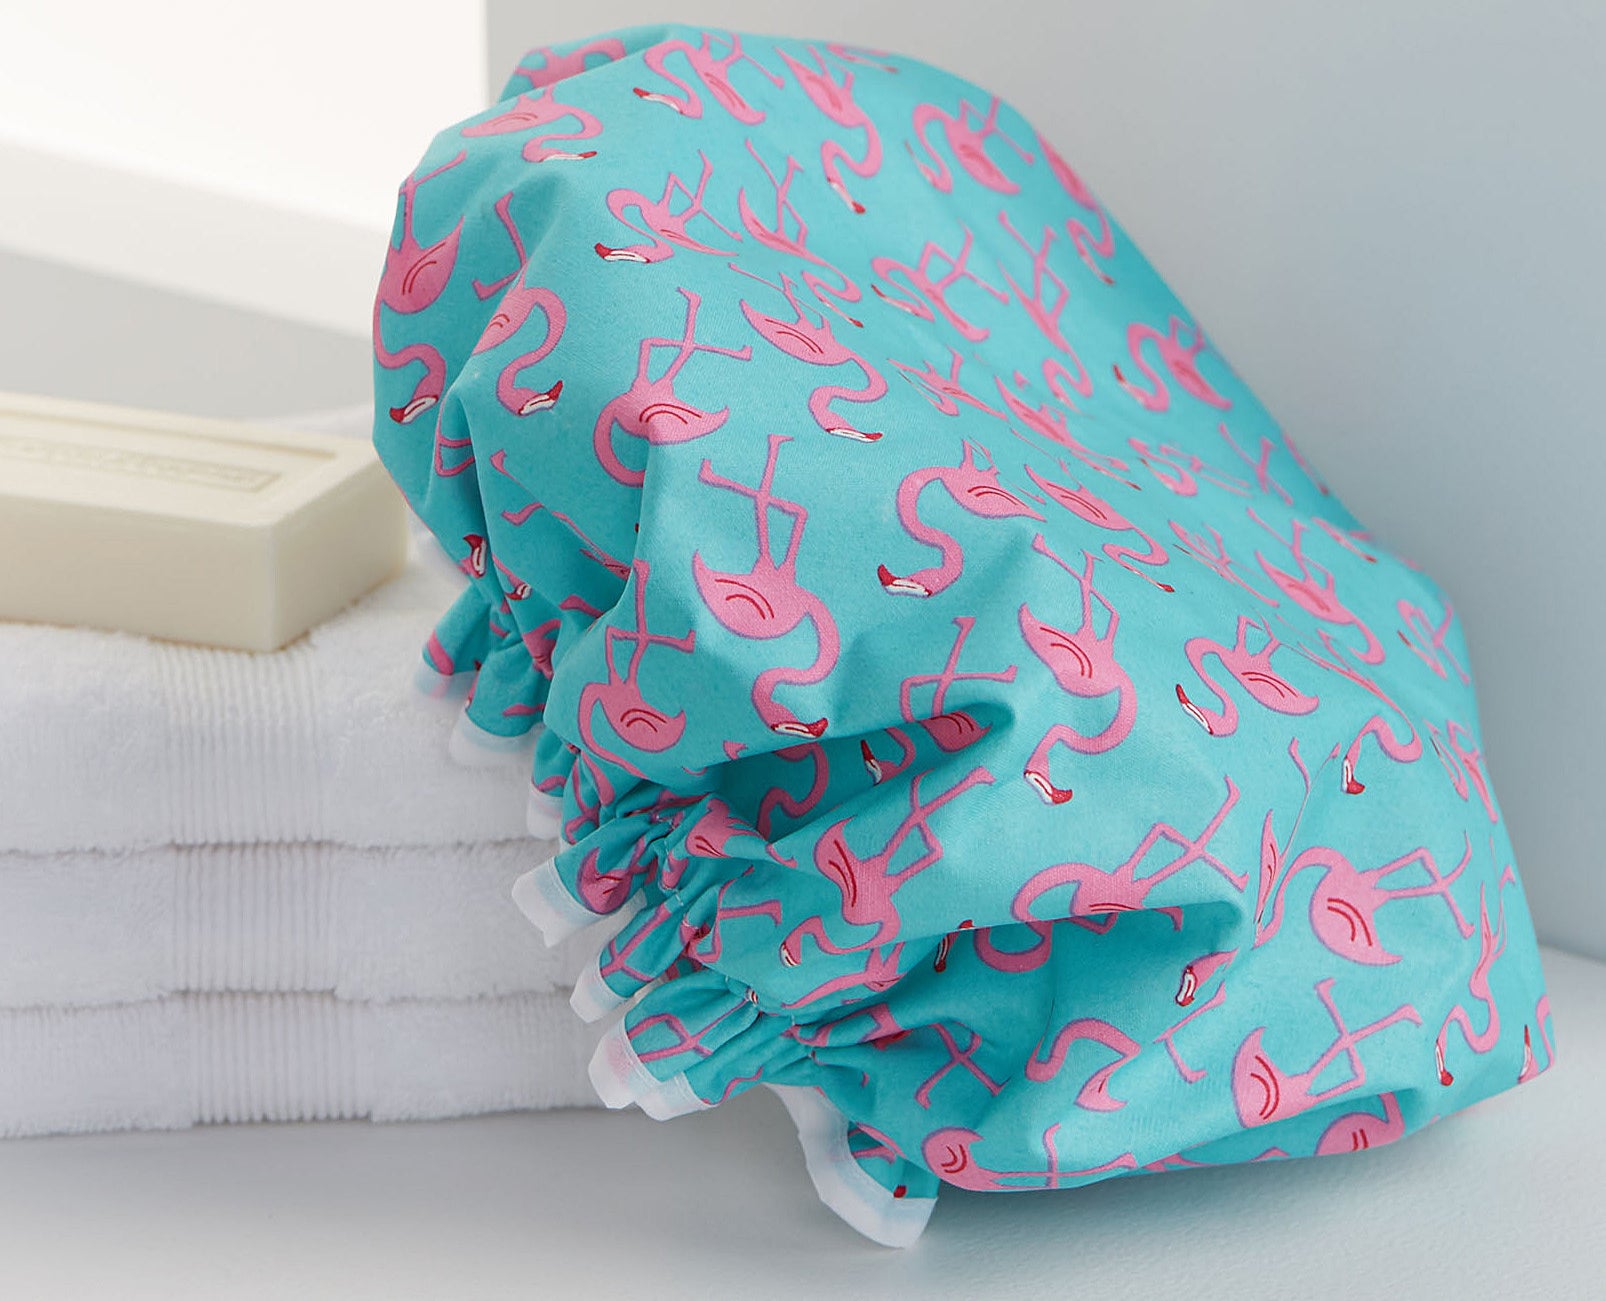 A bright shower cap with flamingos printed all over it